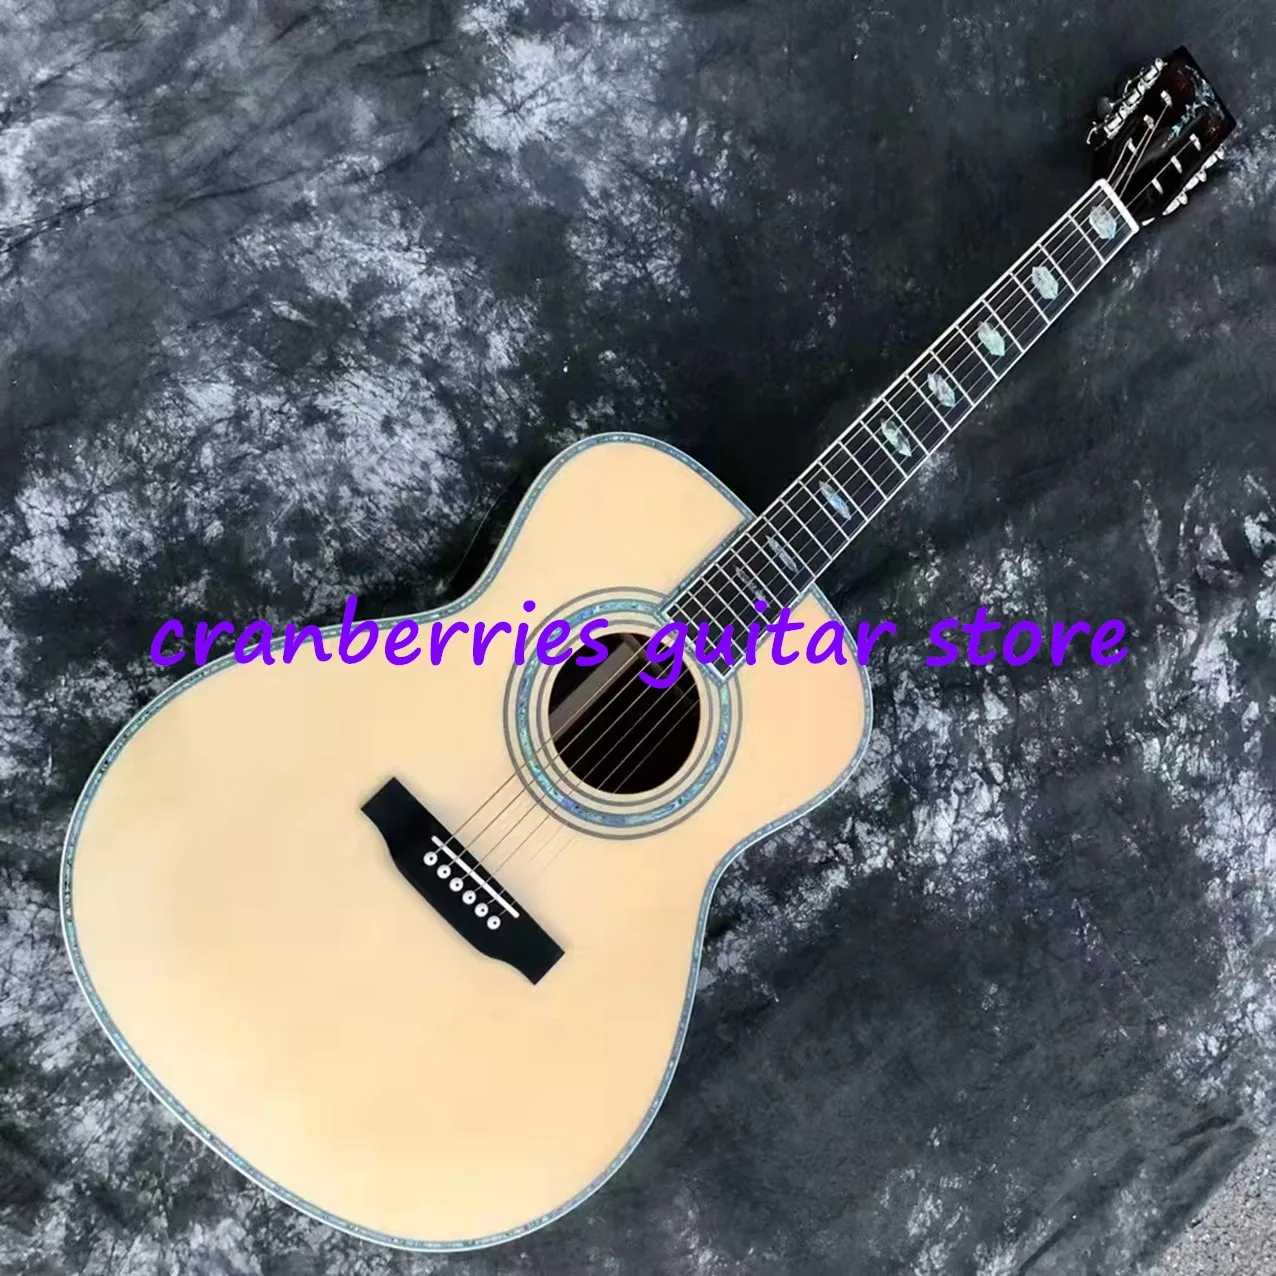 

Custom Guitarra,All Solid Wood Guitar,OM Body,Spruce Top,Rosewood Back and Sides,Real Abalone,Classical Headstock,Free Shipping